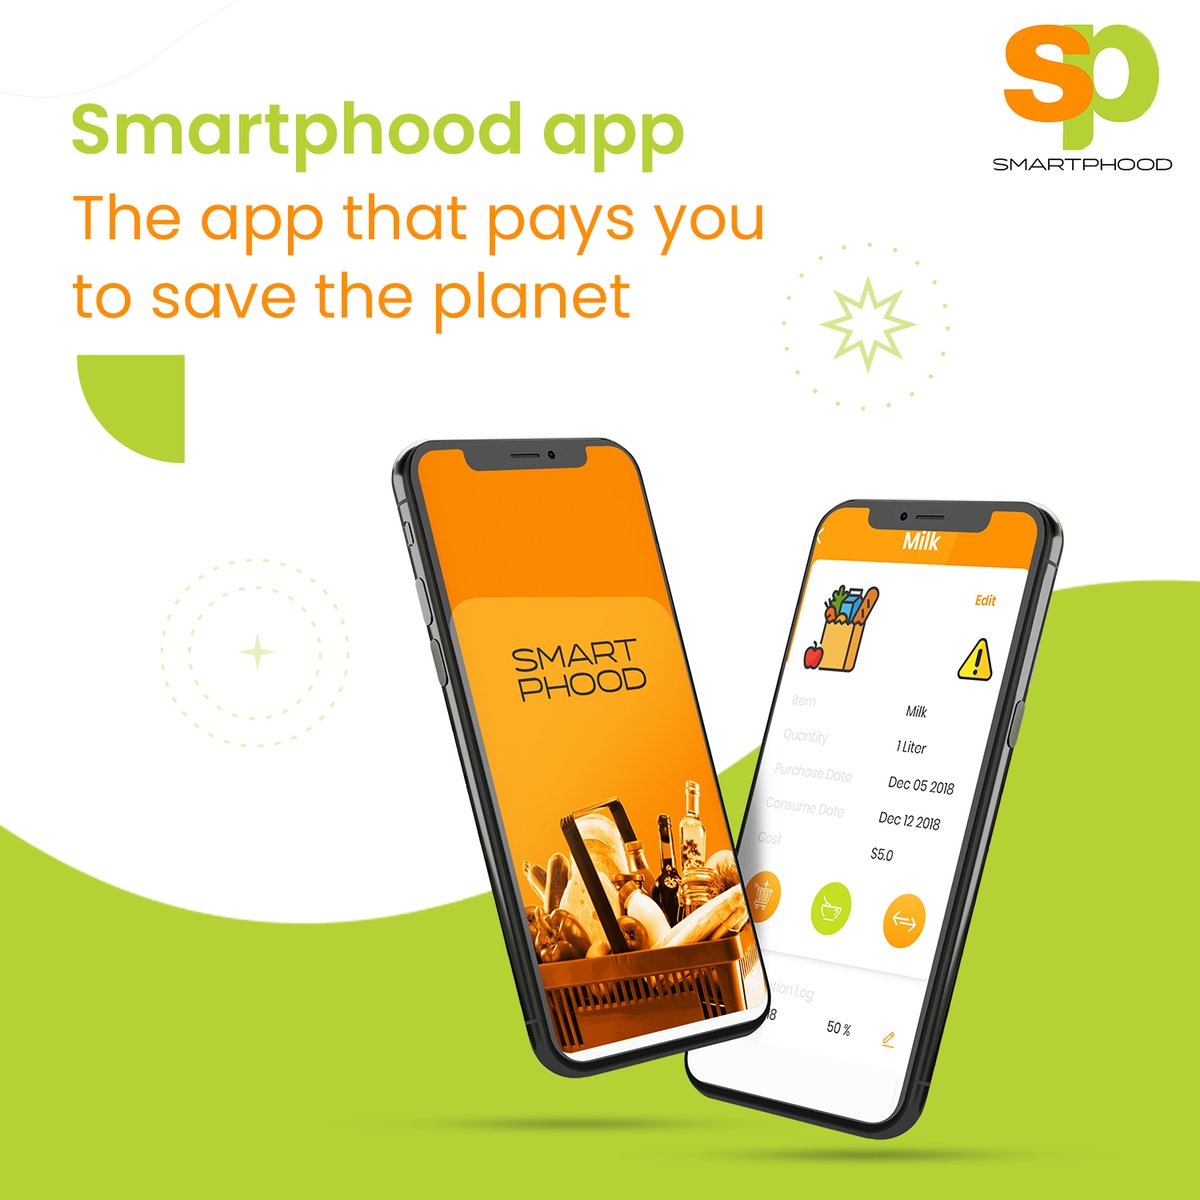 Turn your shopping into savings and sustainability with the Smartphood app. Get it now!

#smartphoodapp #androidapp #iosapp #savemoney #saveenvironment #foodwastagesaving #reducefoodwaste #financemanagement #takecontrol